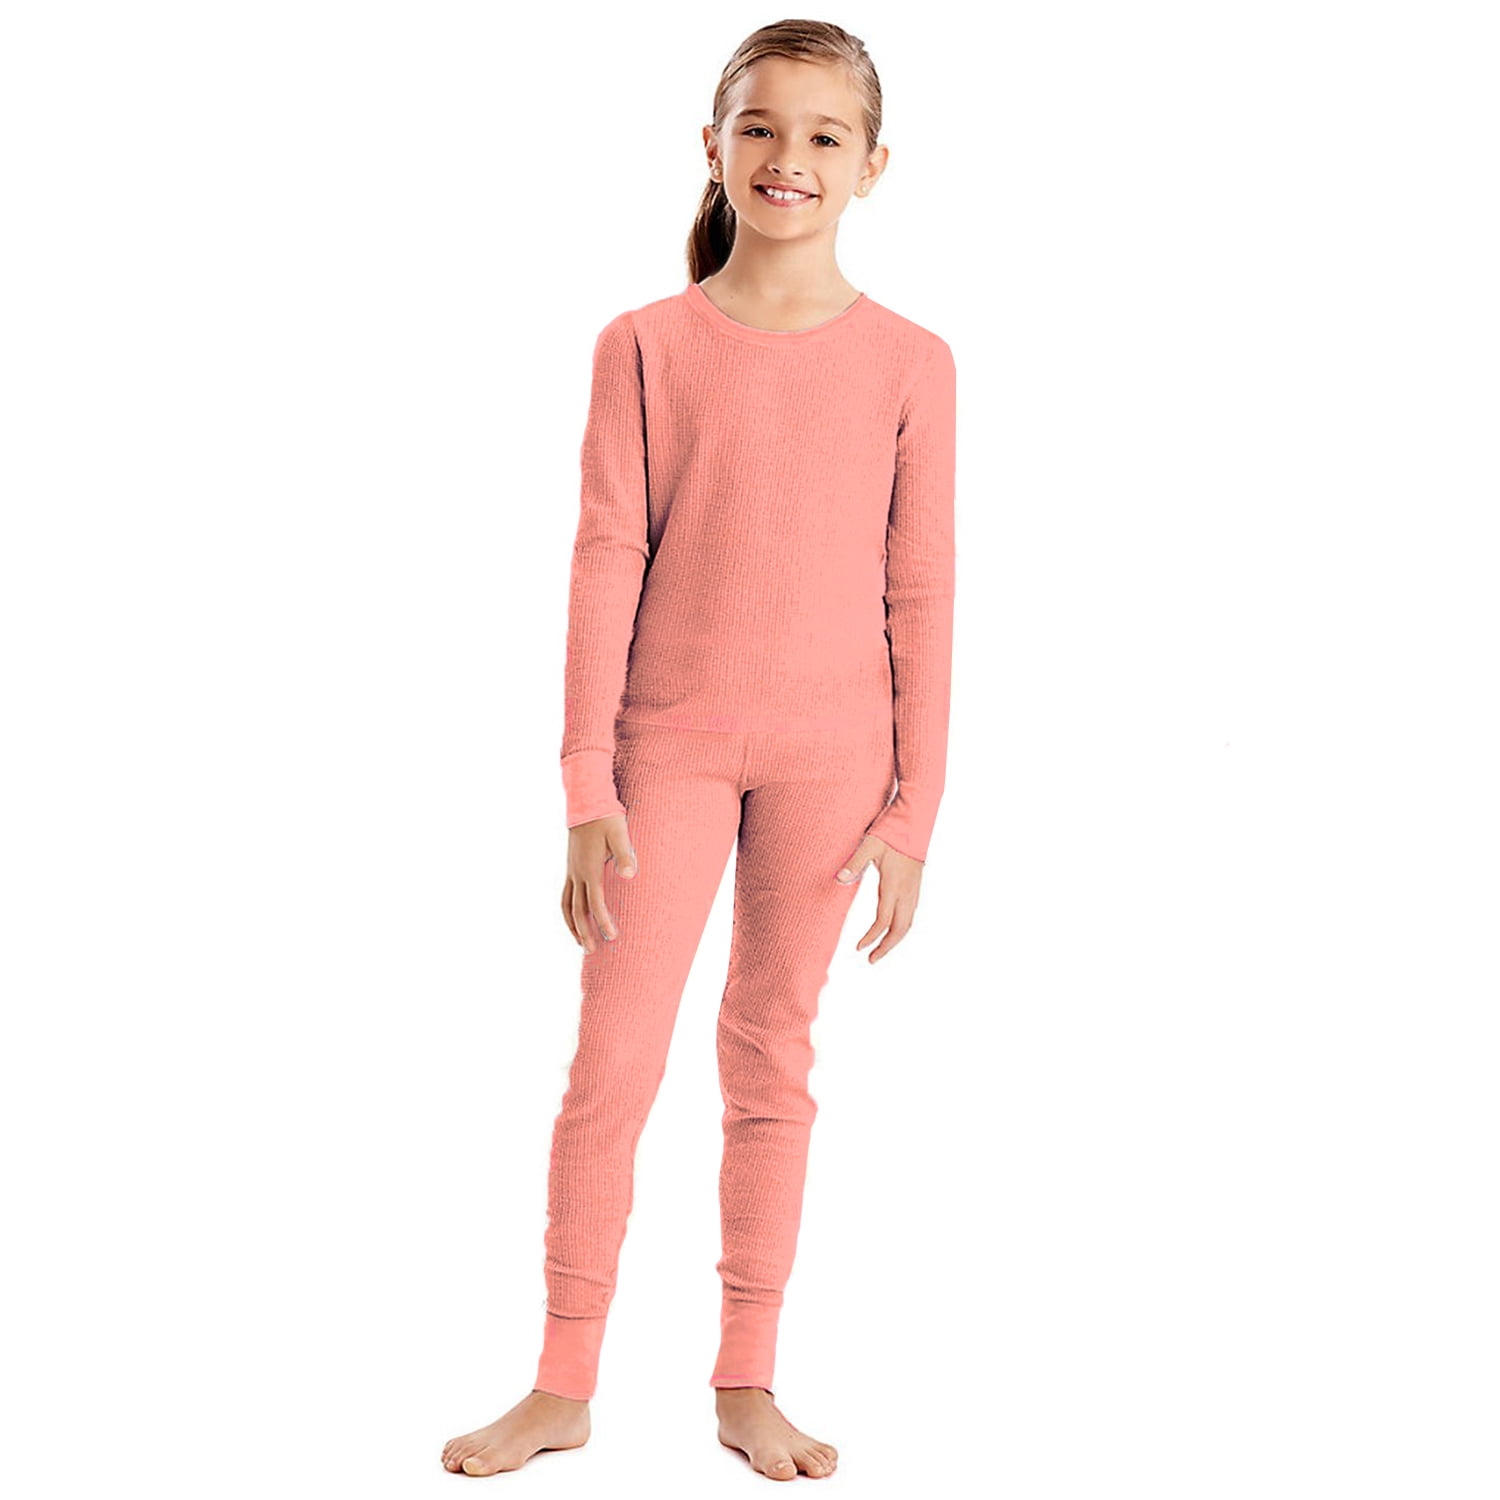 LAVRA Girl’s Cotton Thermal Sets | Fleece Lined Insulated Long John ...